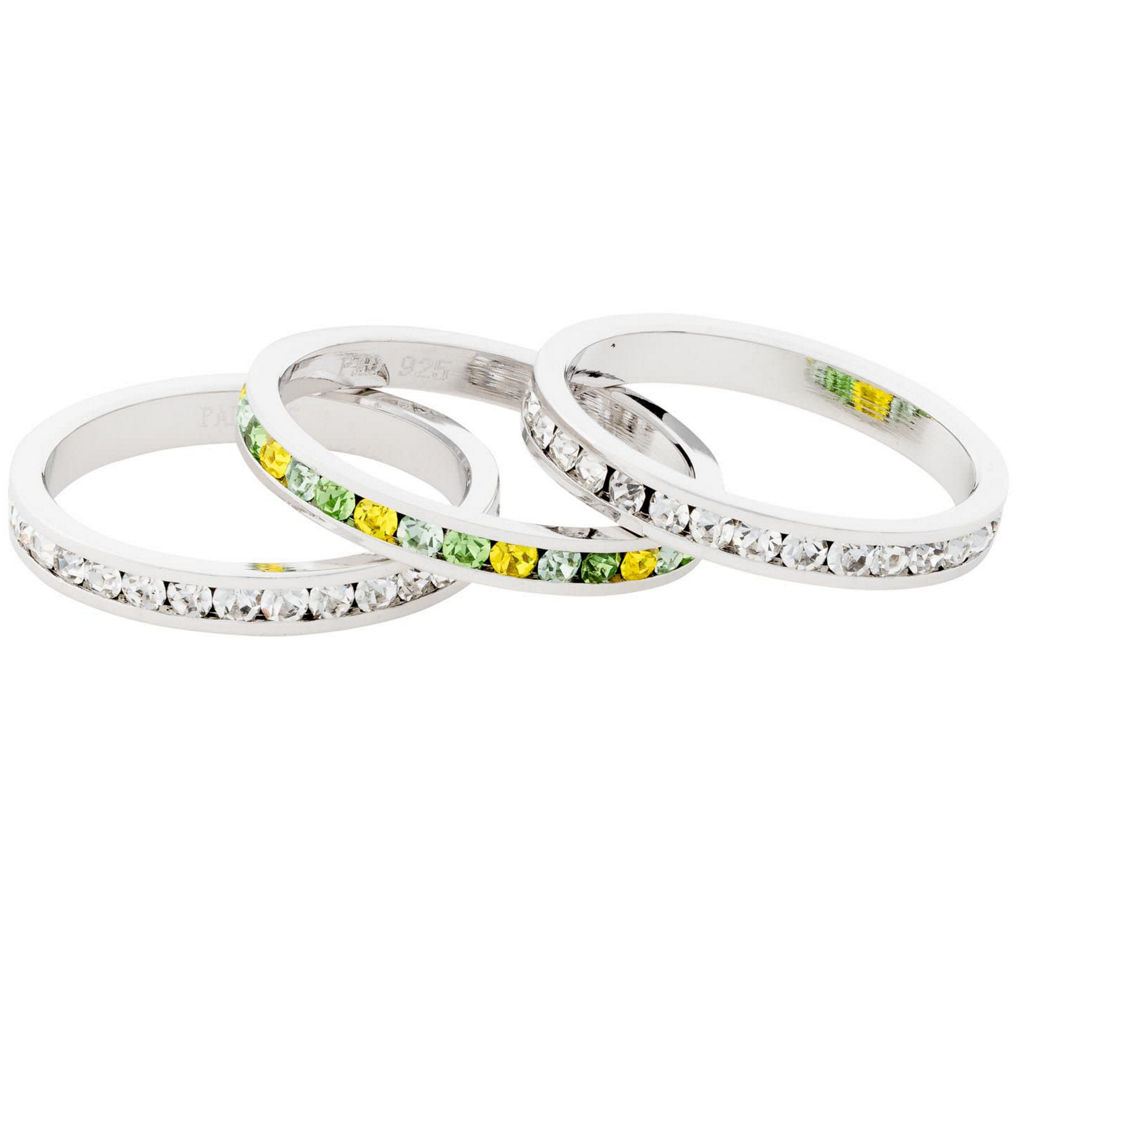 Sterling Silver Multi-Tonal Crystal Eternity Ring Set - Image 2 of 2